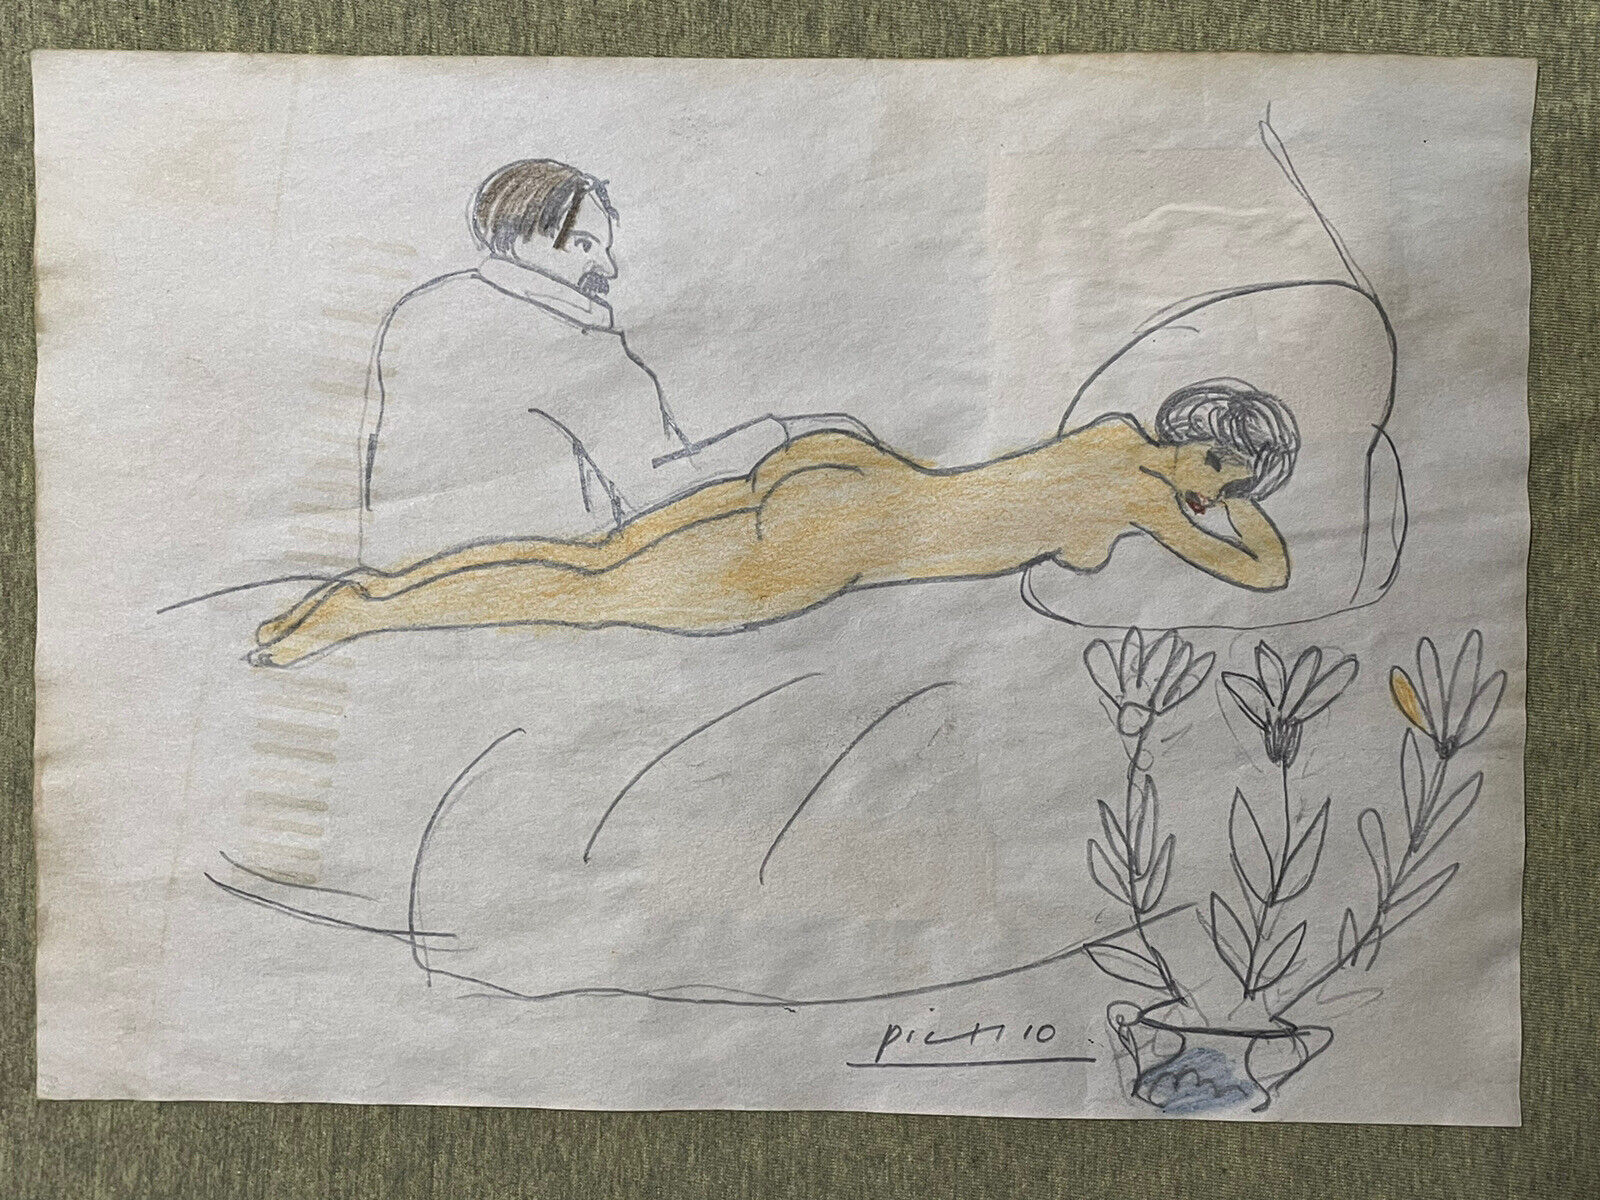 Pablo Picasso (Handmade) Drawing - Painting on old paper signed & stamped